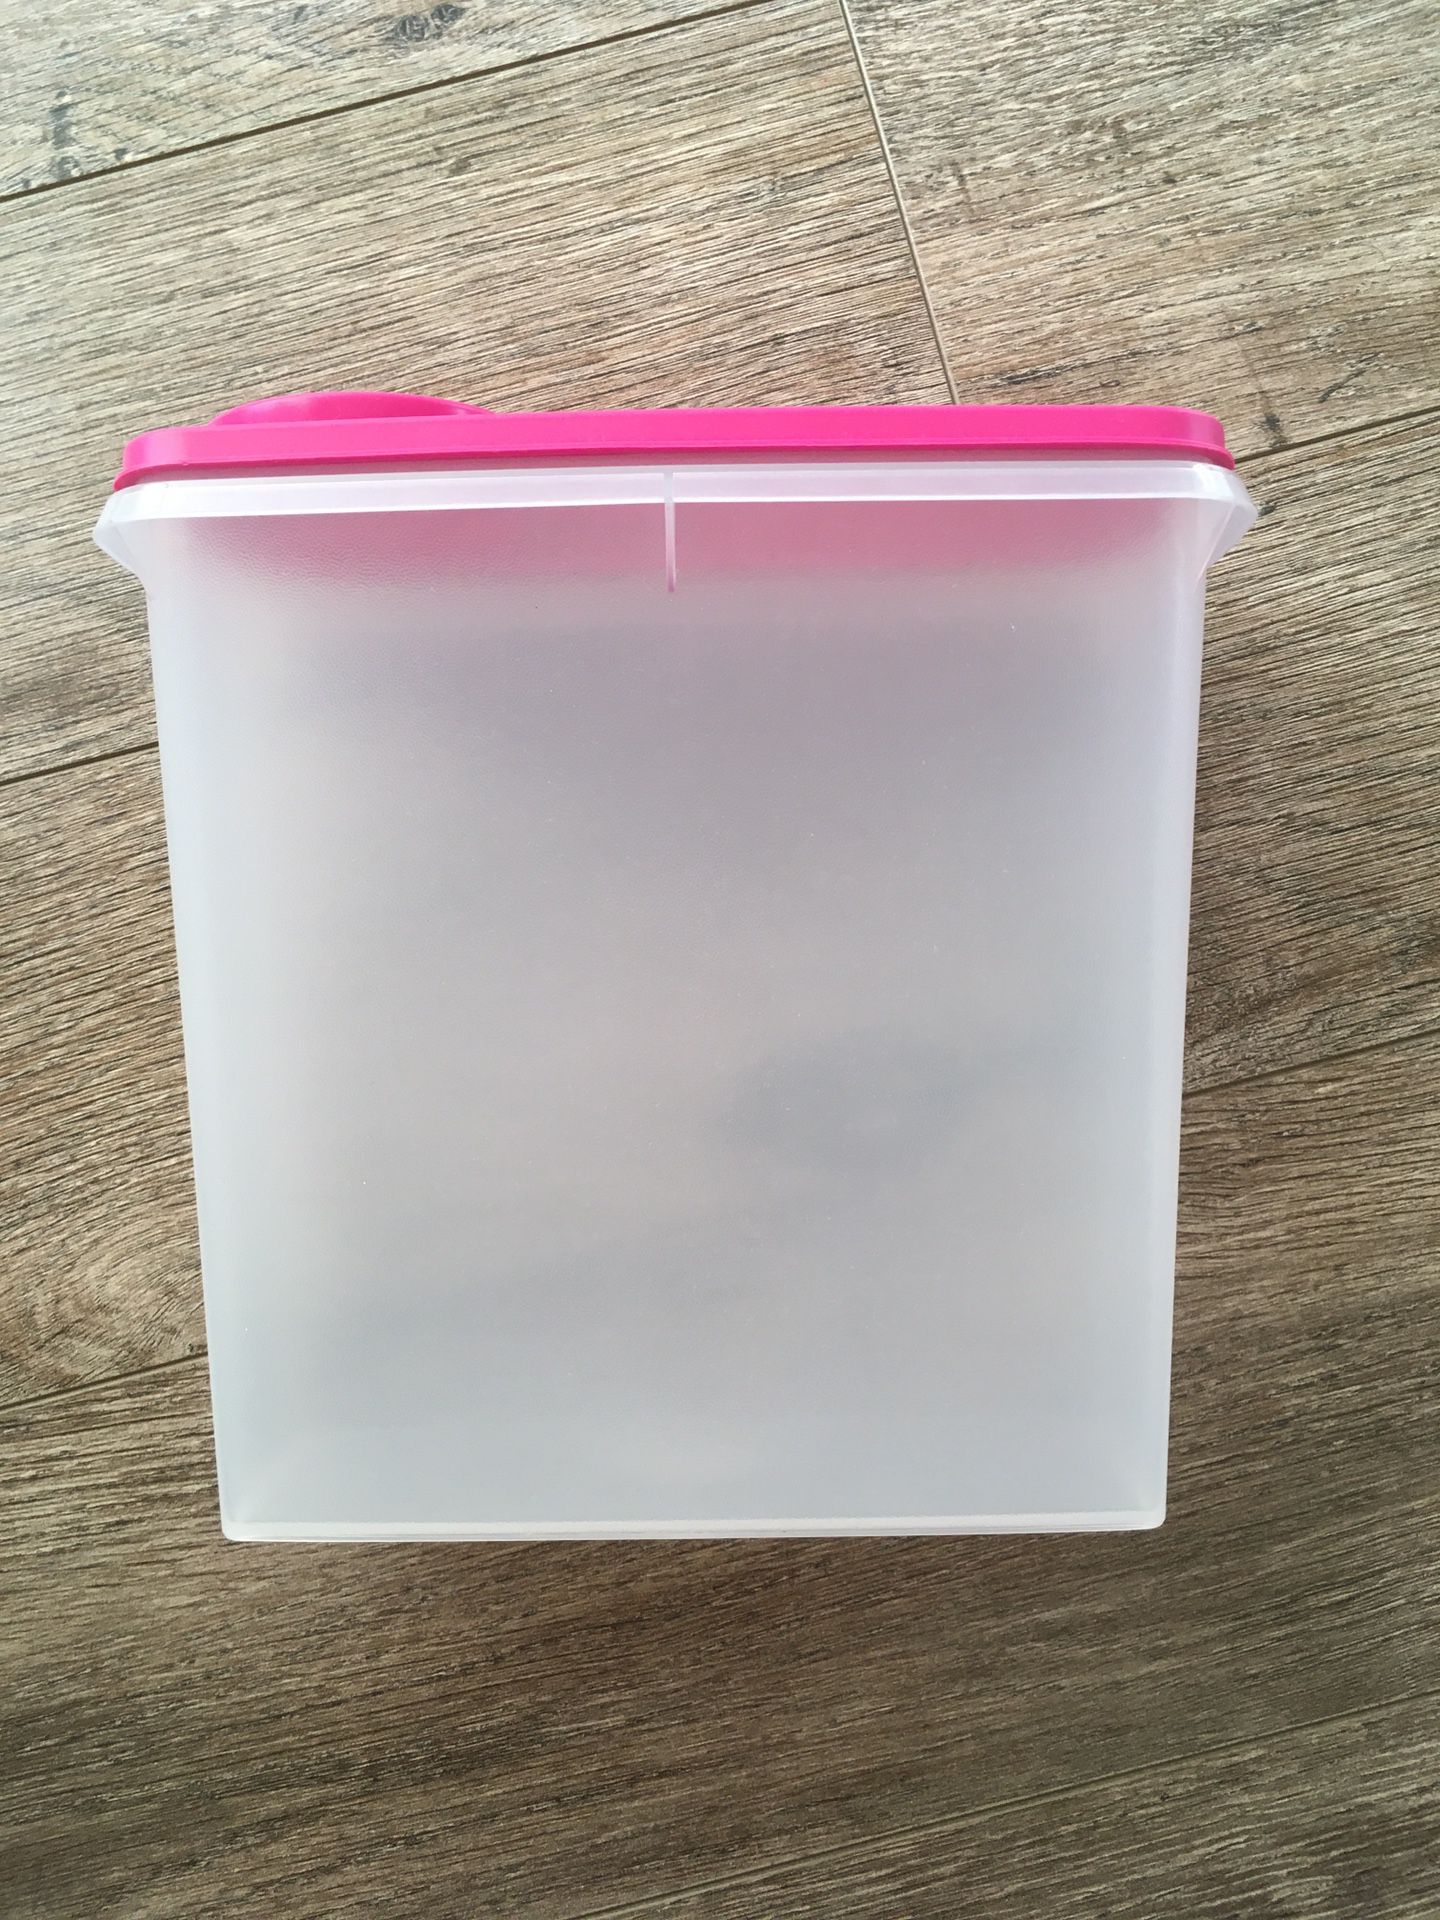 Tupperware Cereal Container Keeper 1588B-1 Black Lid 1590-1 EUC for Sale in  Lacey, WA - OfferUp